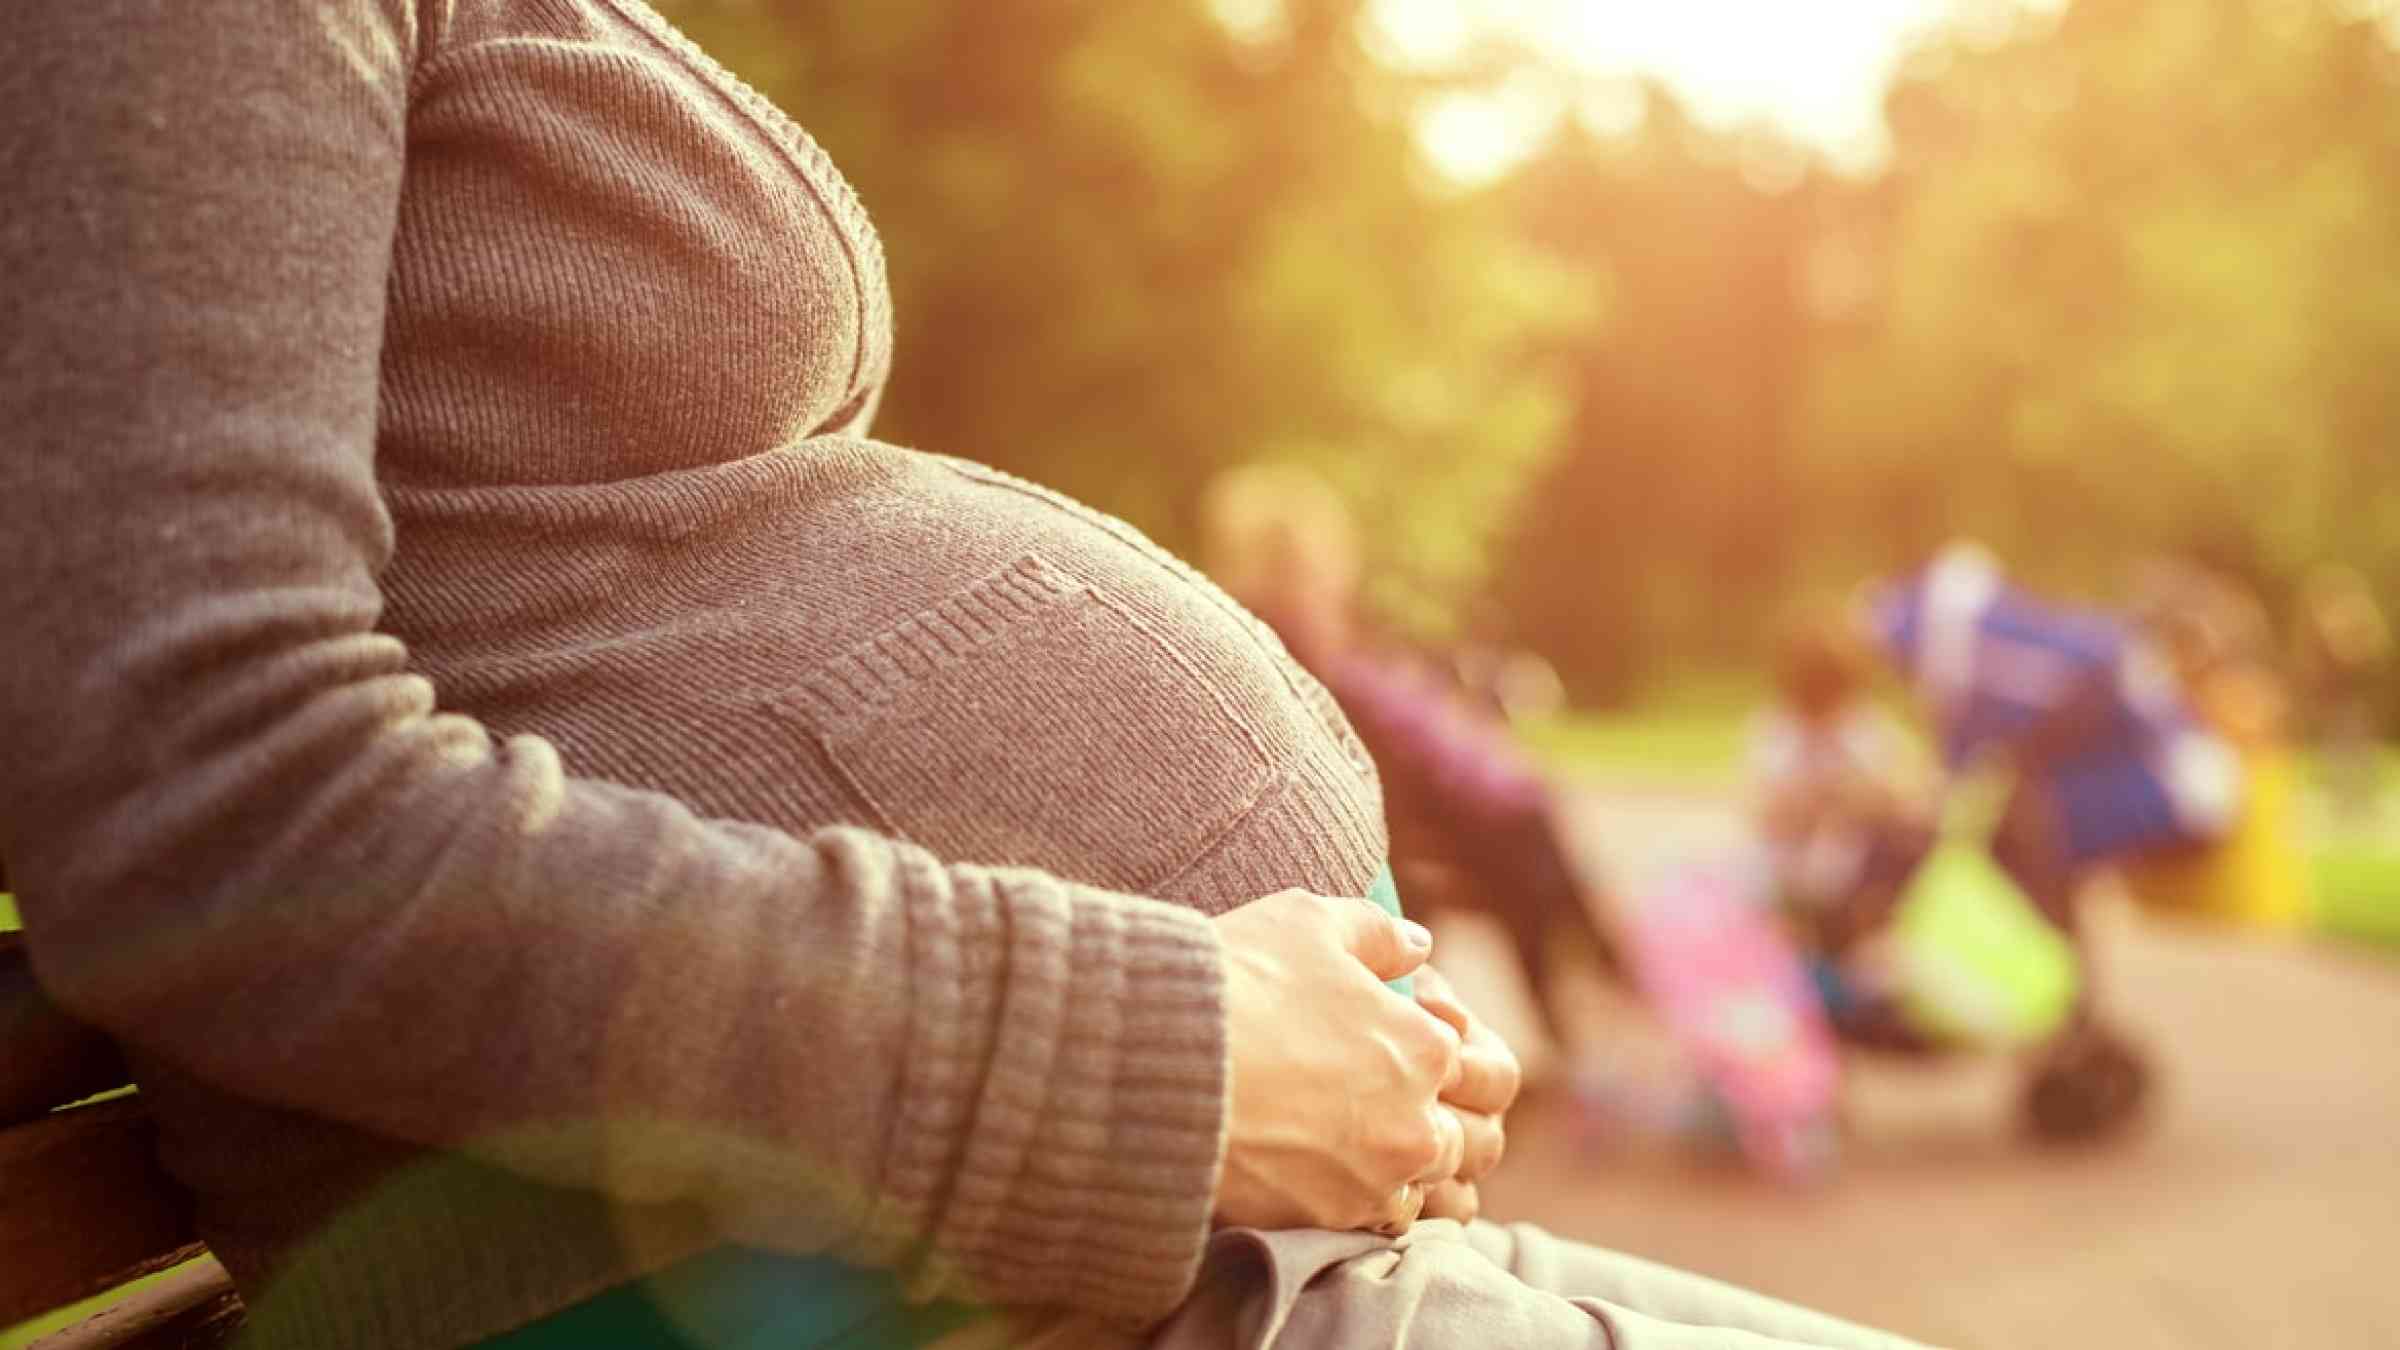 Pregnant woman sitting on a bench